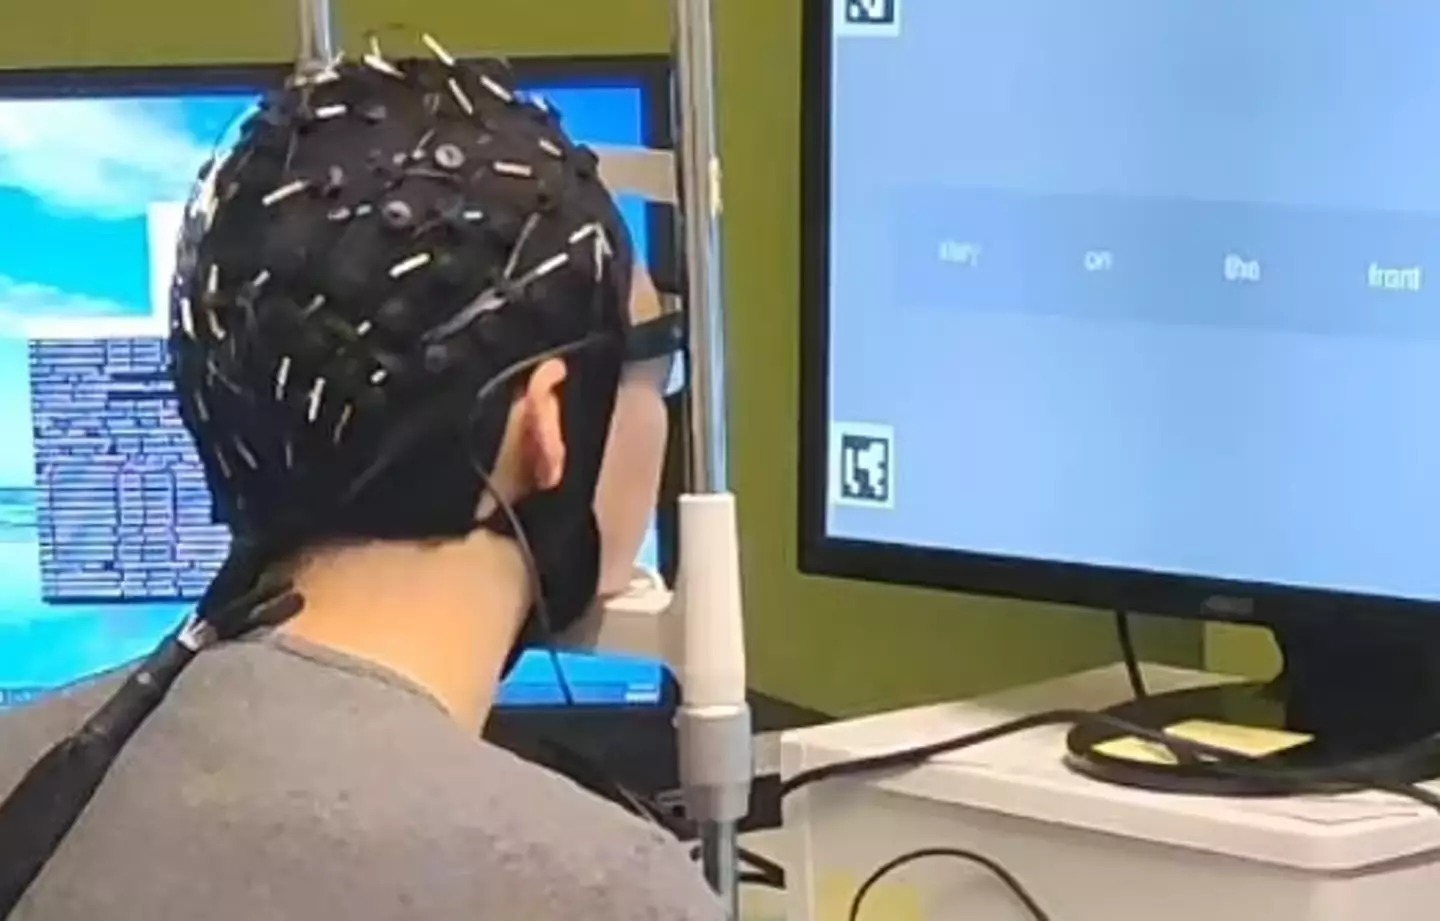 The helmet can translate thought to text.